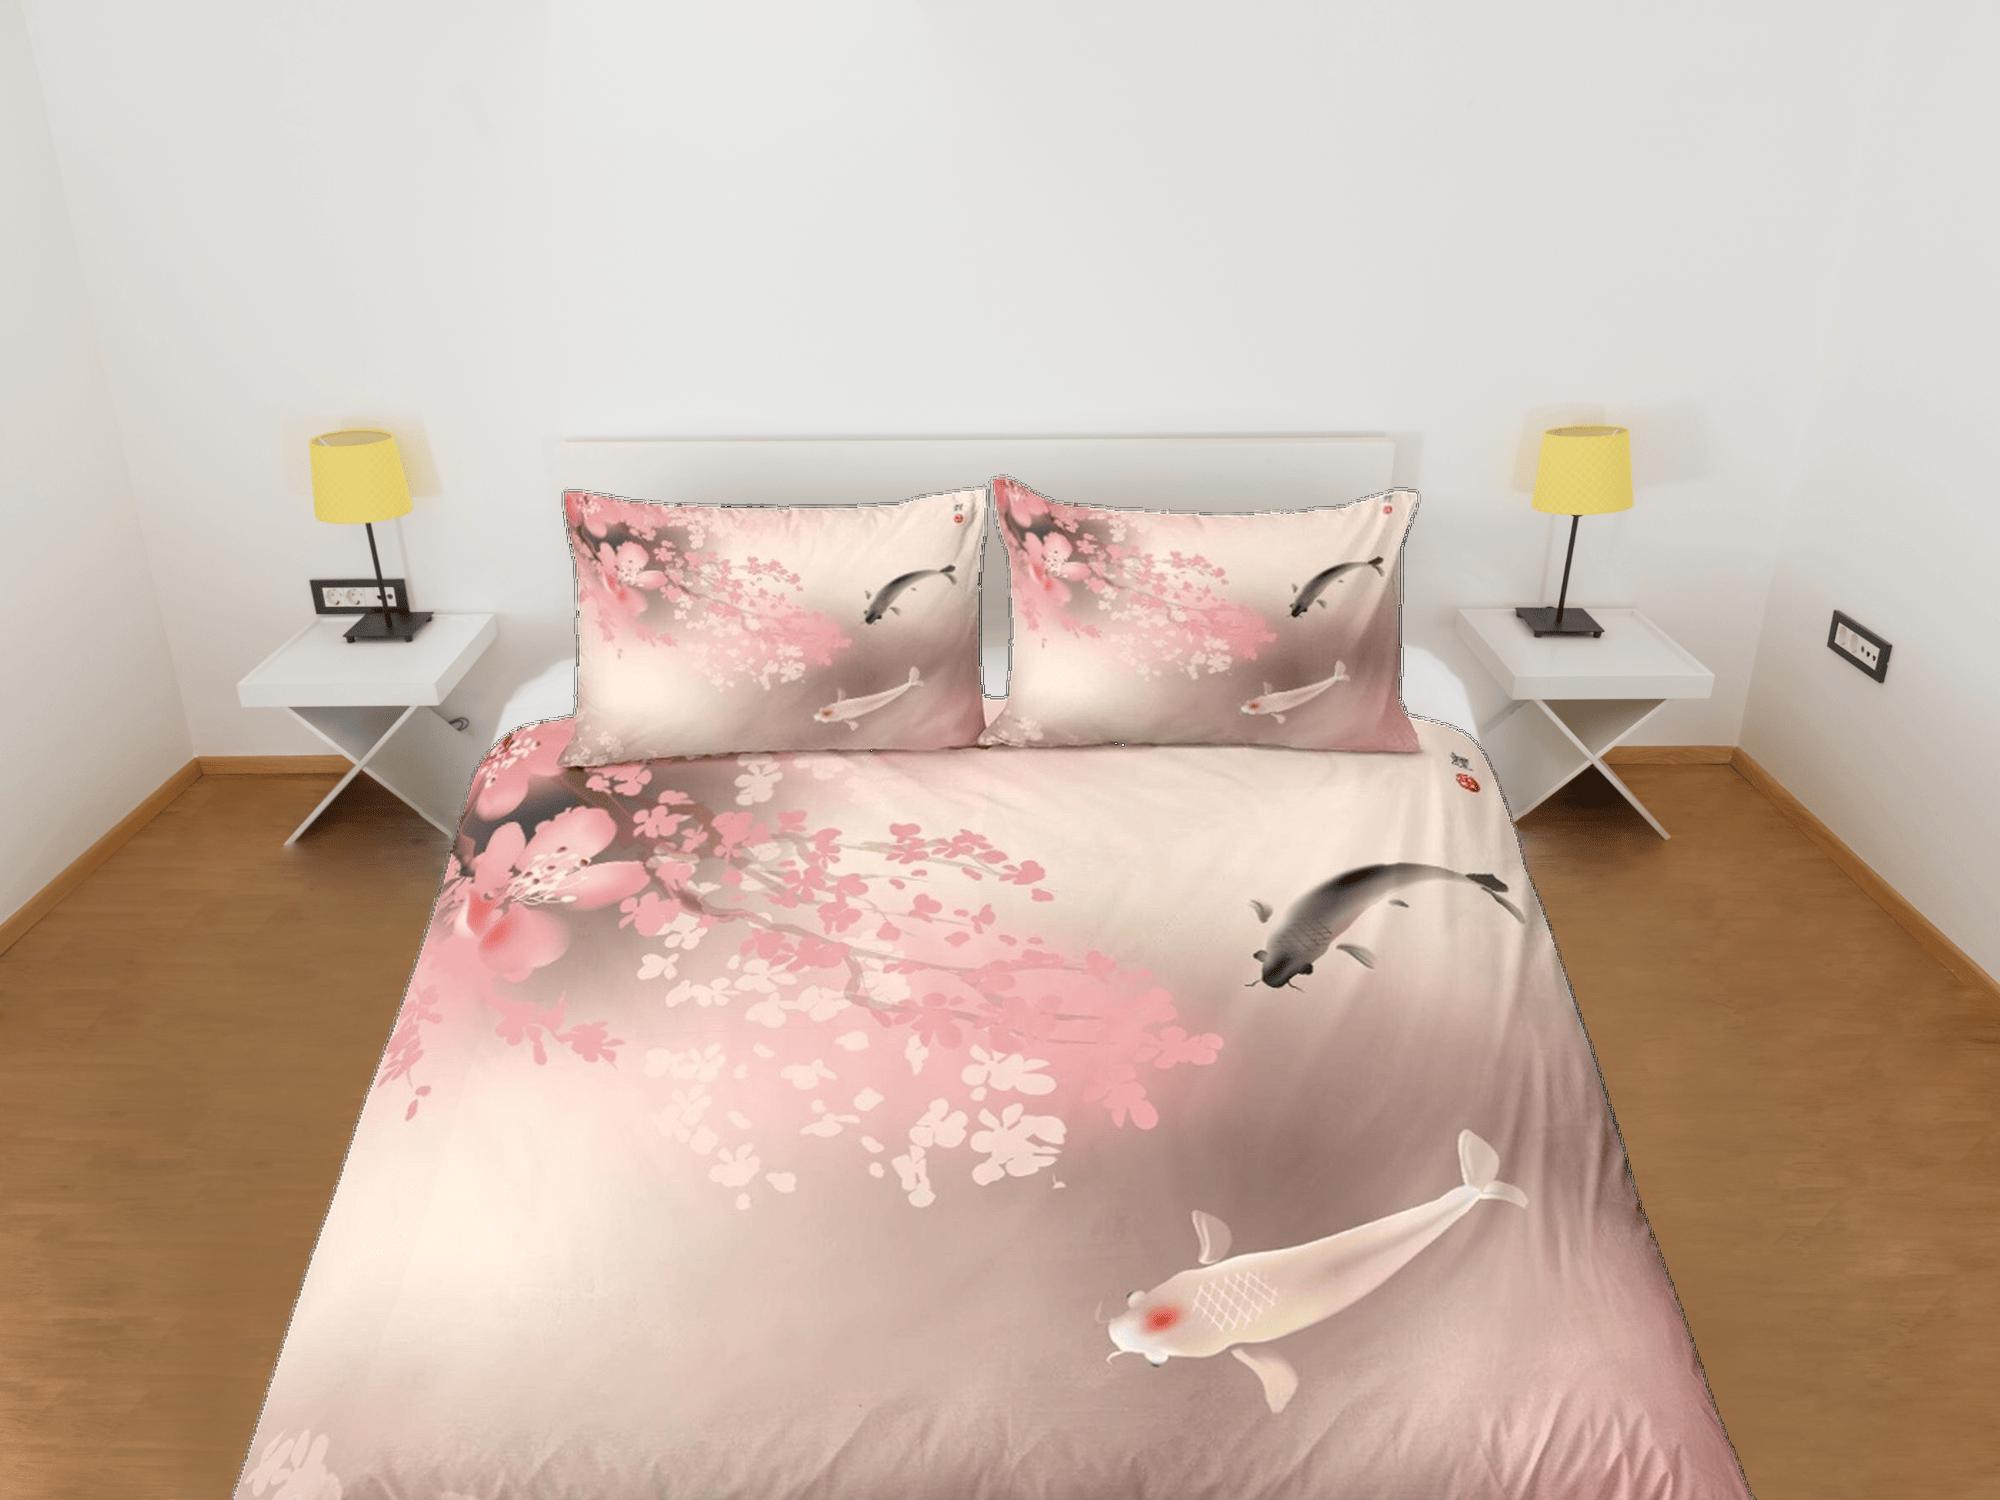 daintyduvet Koi fish pink oriental bedding, floral prints on japanese duvet cover set for king, queen, full, twin, single, toddler, minimalist bedding